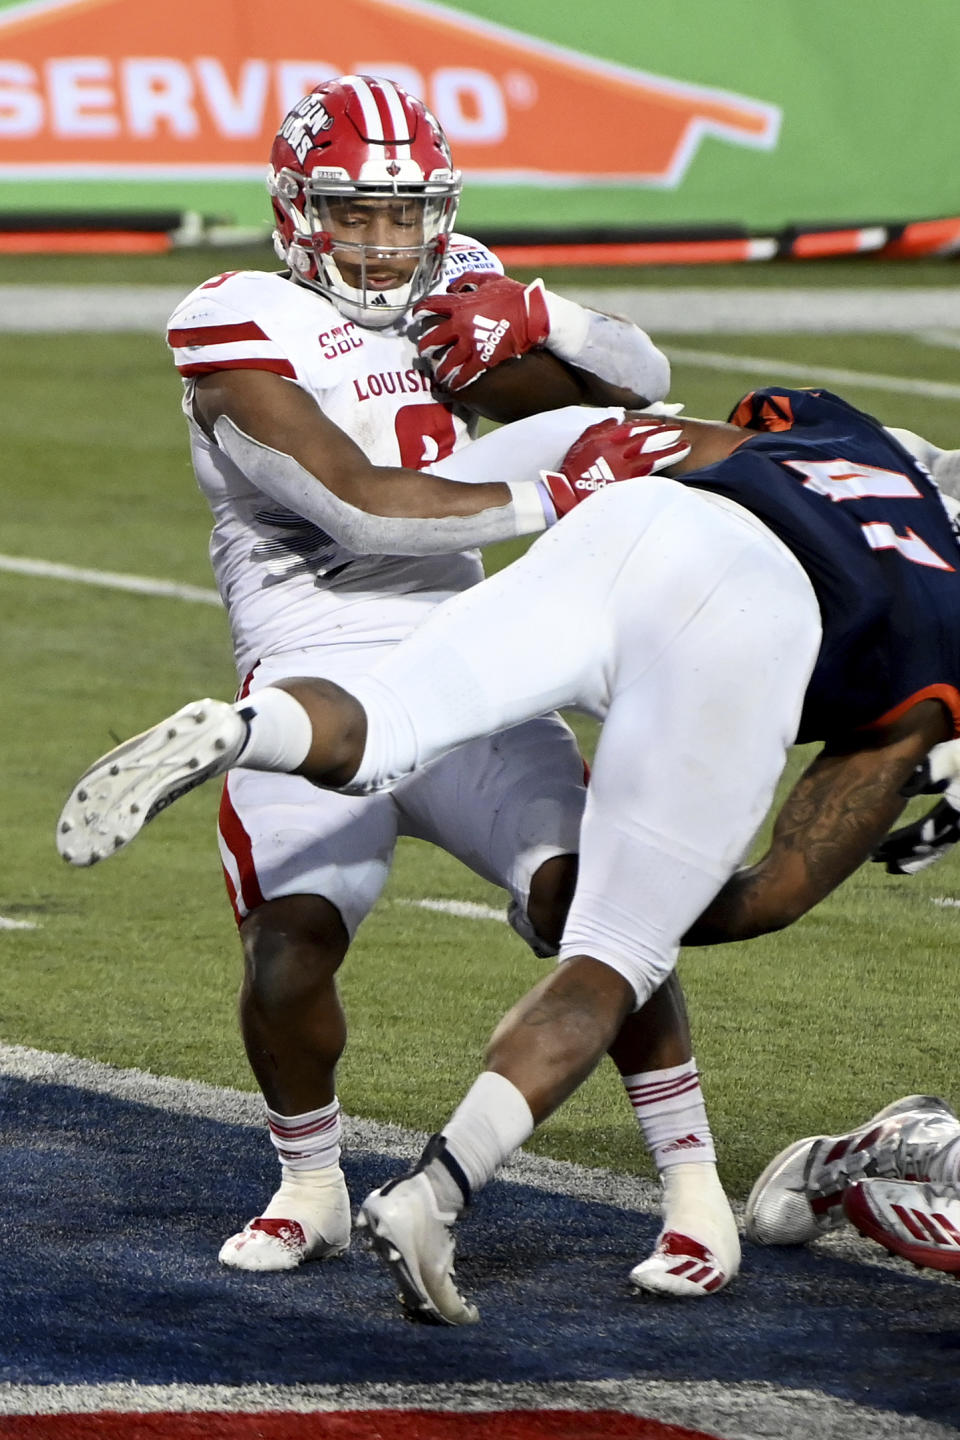 Louisiana-Lafayette running back Trey Ragas (9 scores the go-ahead touchdown as UTSA linebacker De'Marco Guidry (41) goes for the tackle during the fourth quarter of the First Responder Bowl NCAA college football game in Dallas, Saturday, Dec. 26, 2020. (AP Photo/Matt Strasen)